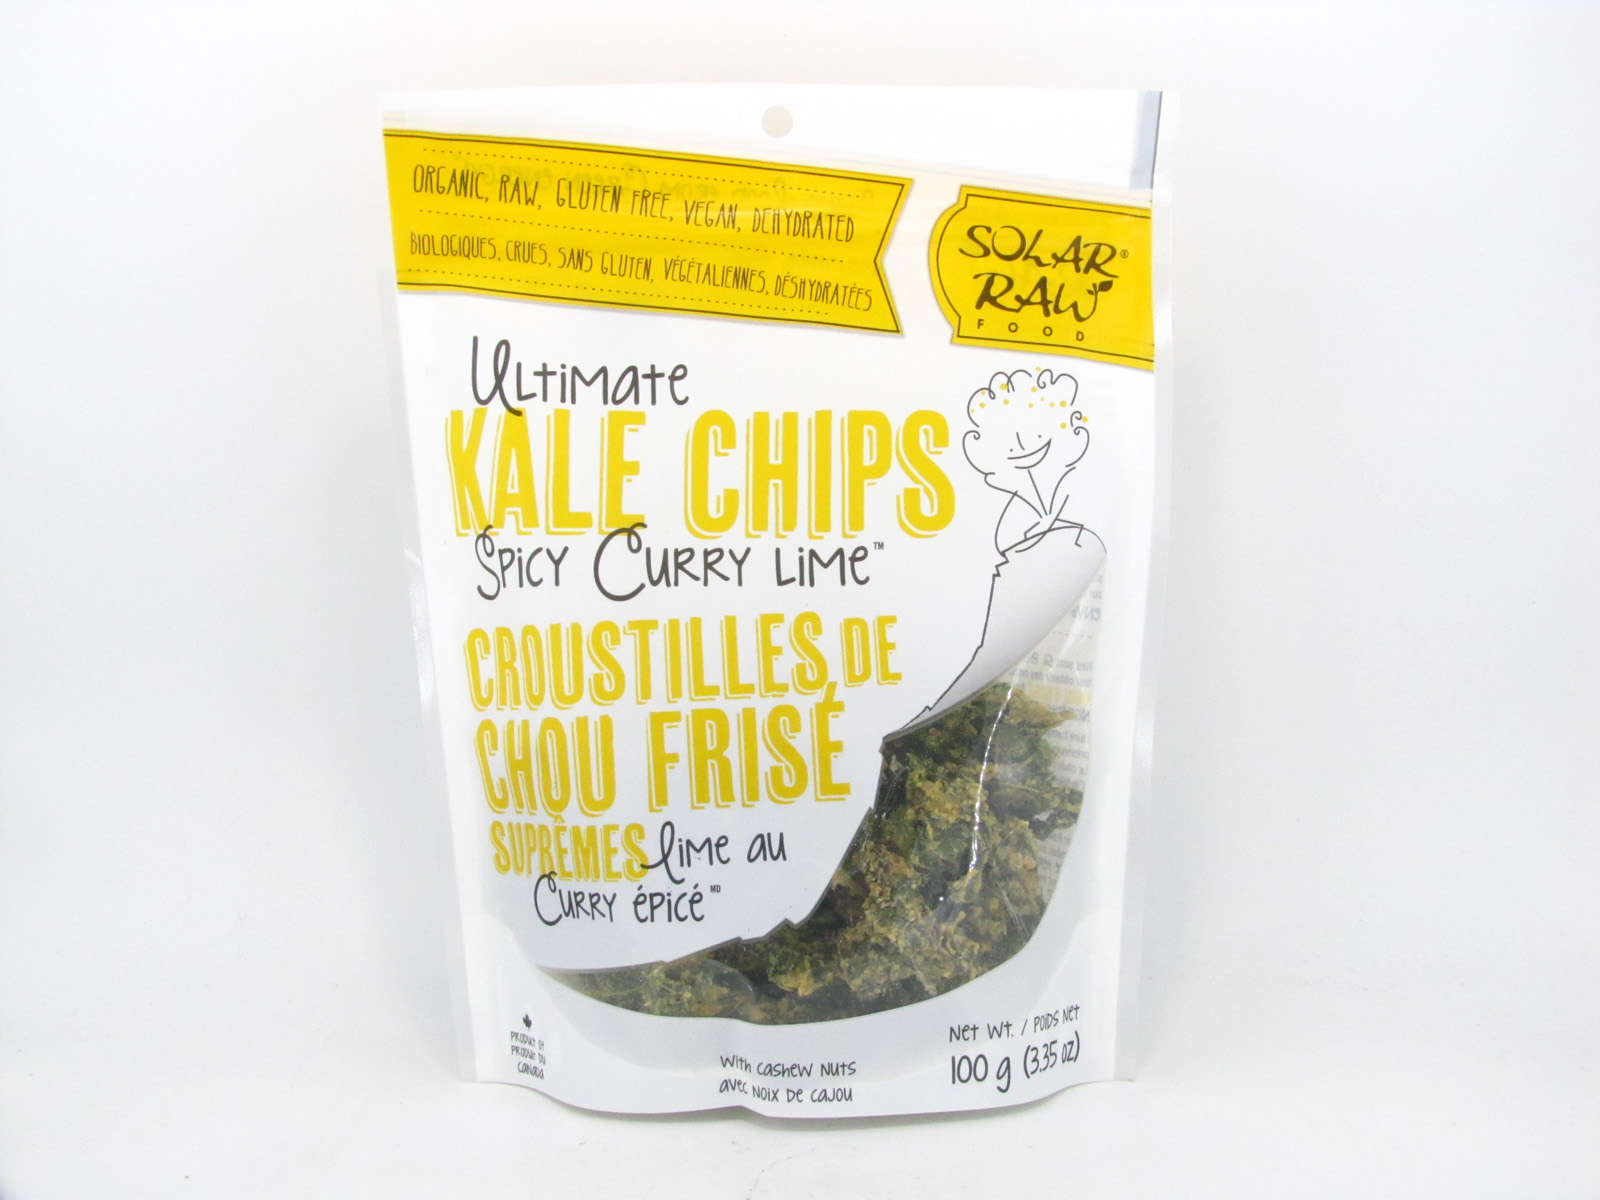 Kale Chips - Spice Curry Lime - front view